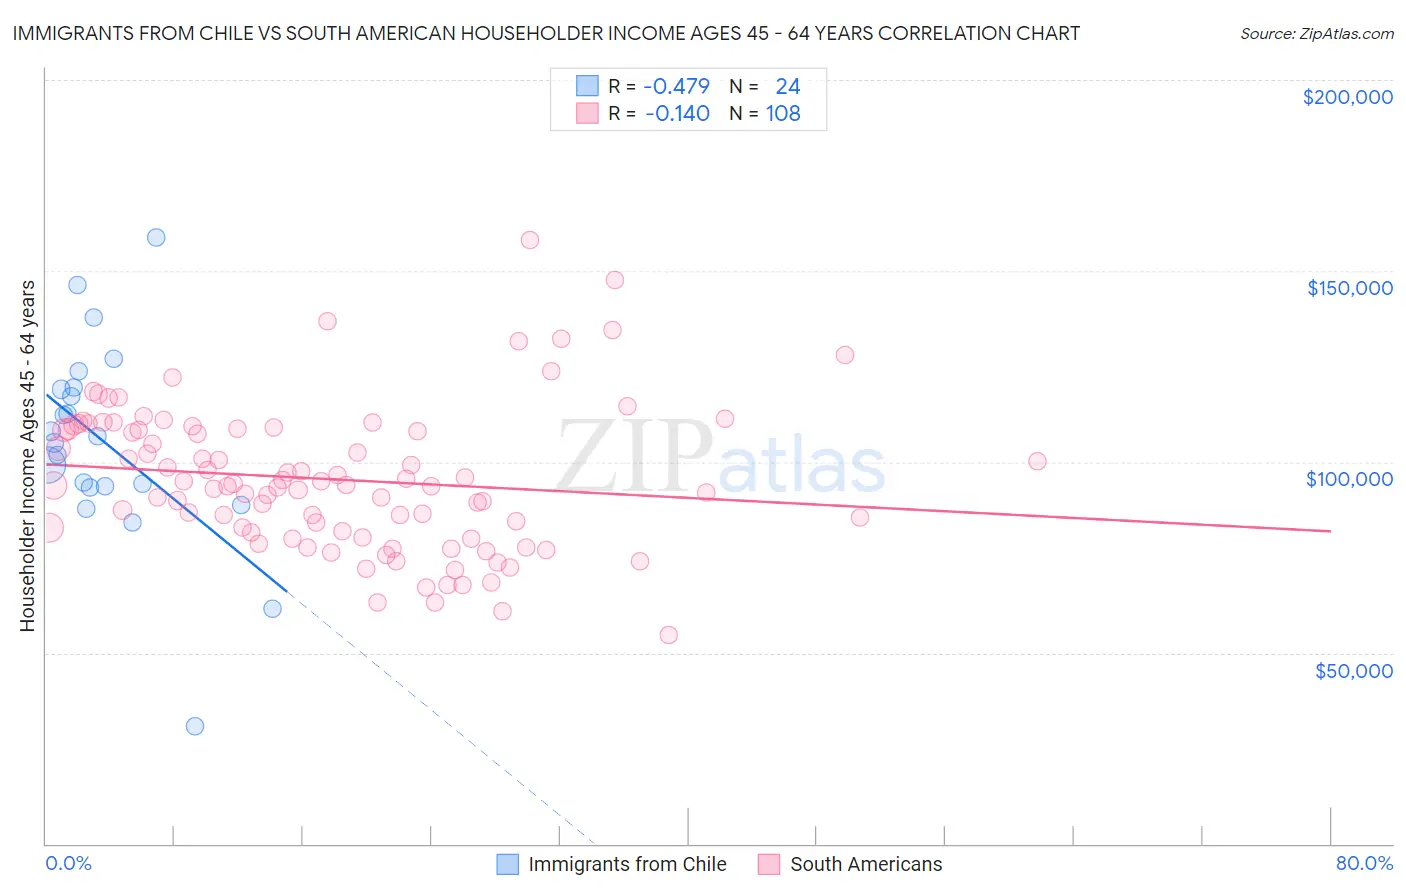 Immigrants from Chile vs South American Householder Income Ages 45 - 64 years